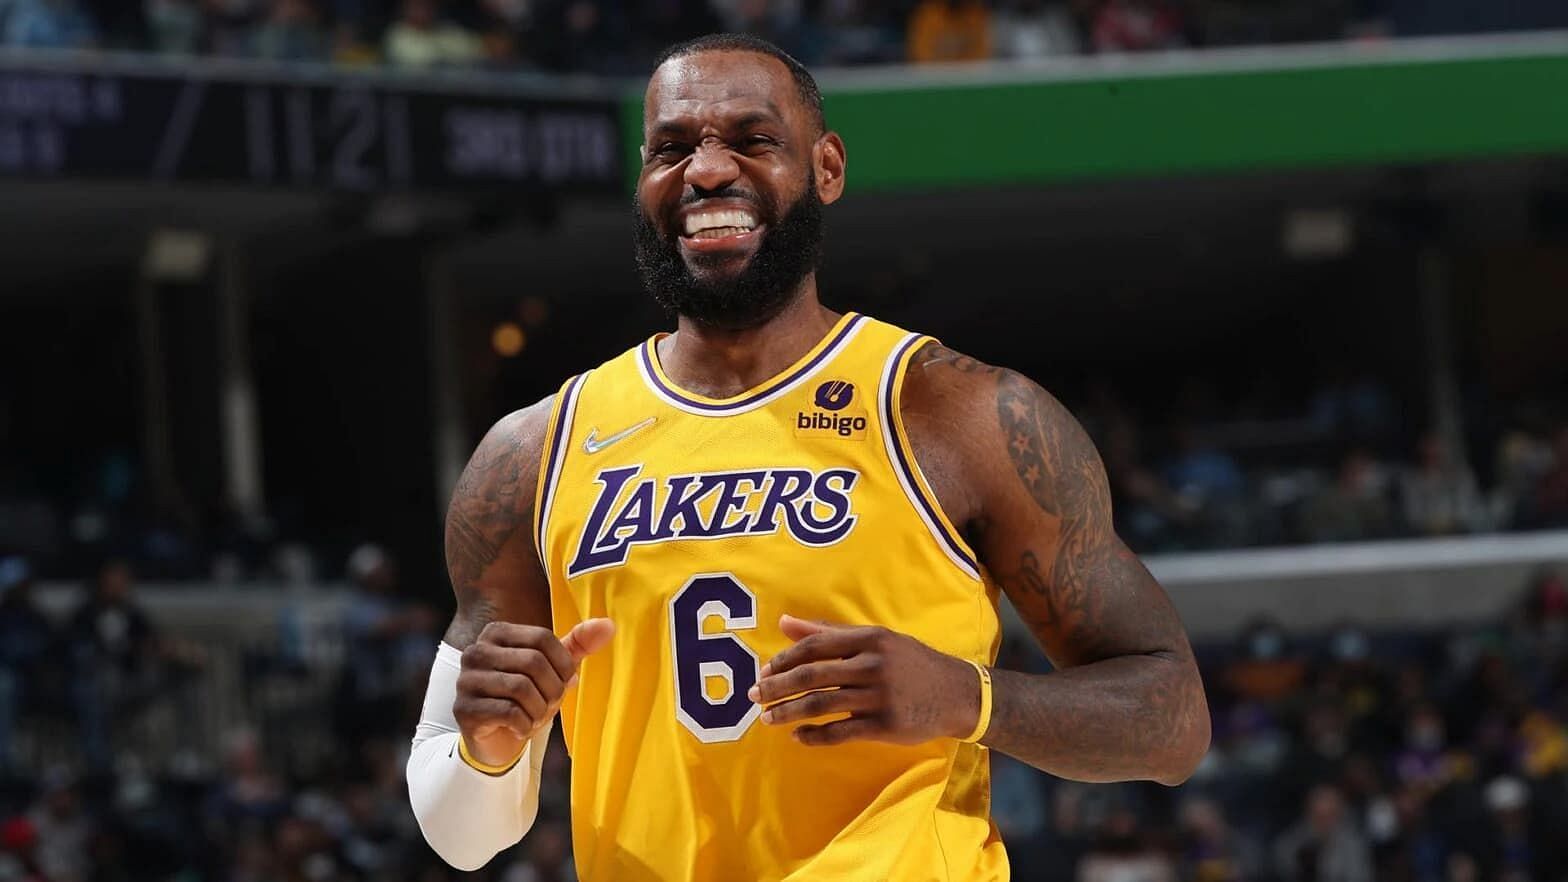 What are the details of LeBron James’ contract extension with the Lakers?Salary, work period, etc.